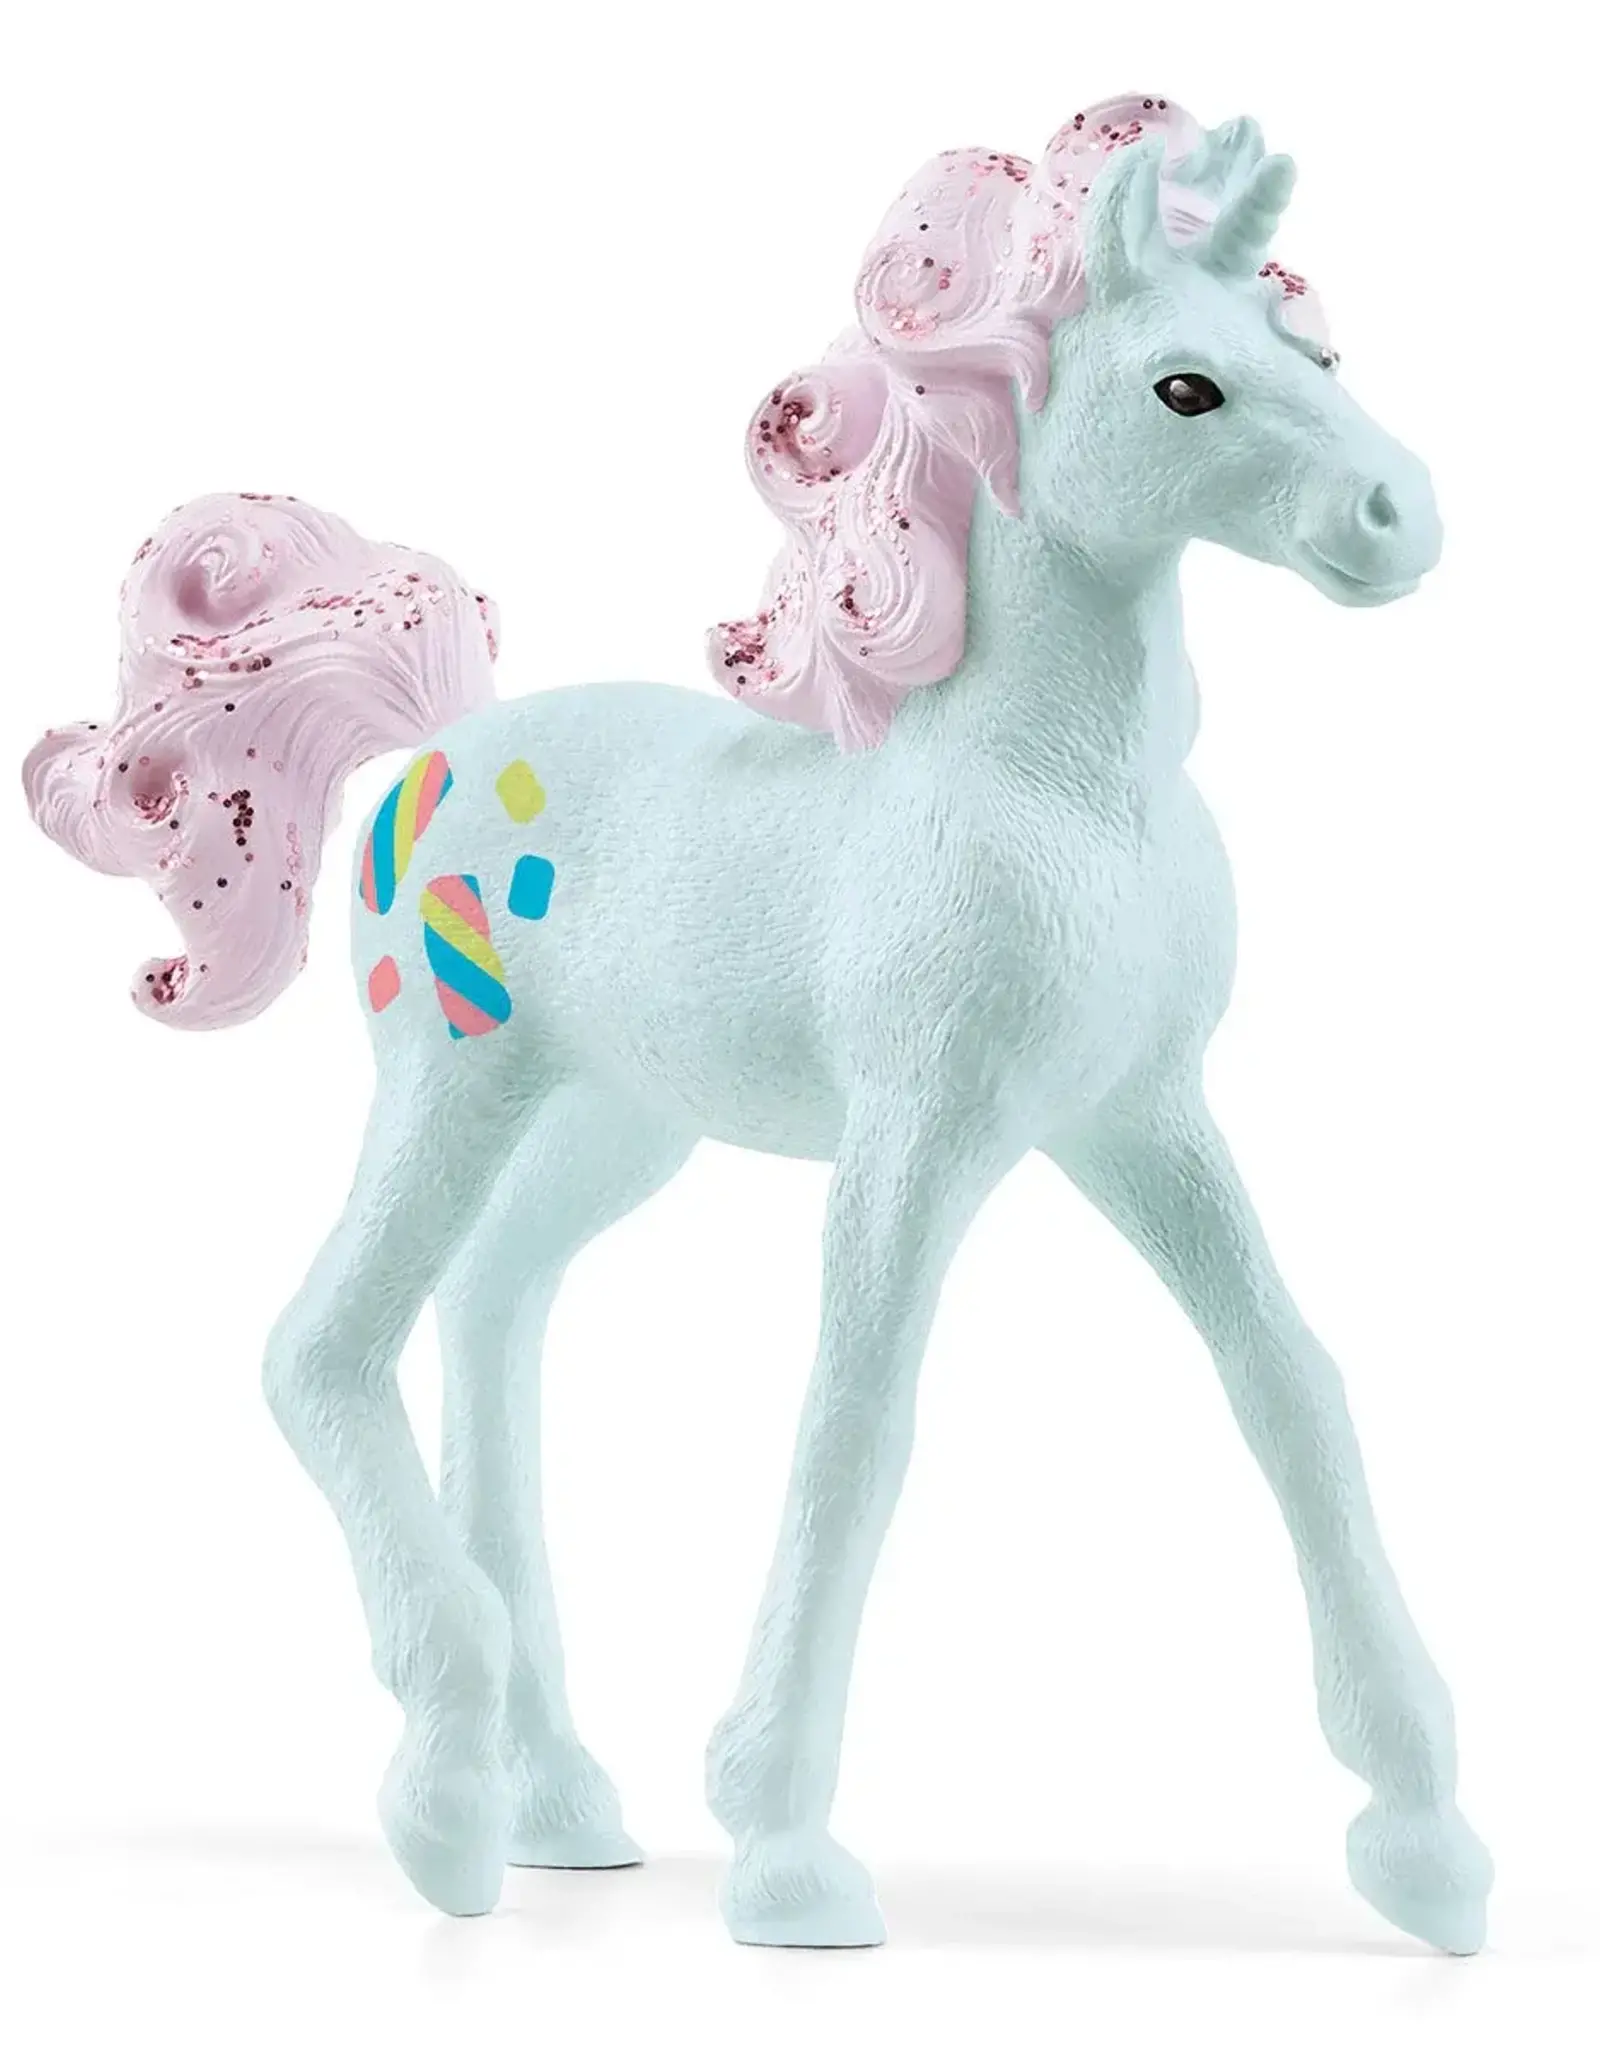 Schleich Marshmallow Unicorn Foal Collectible